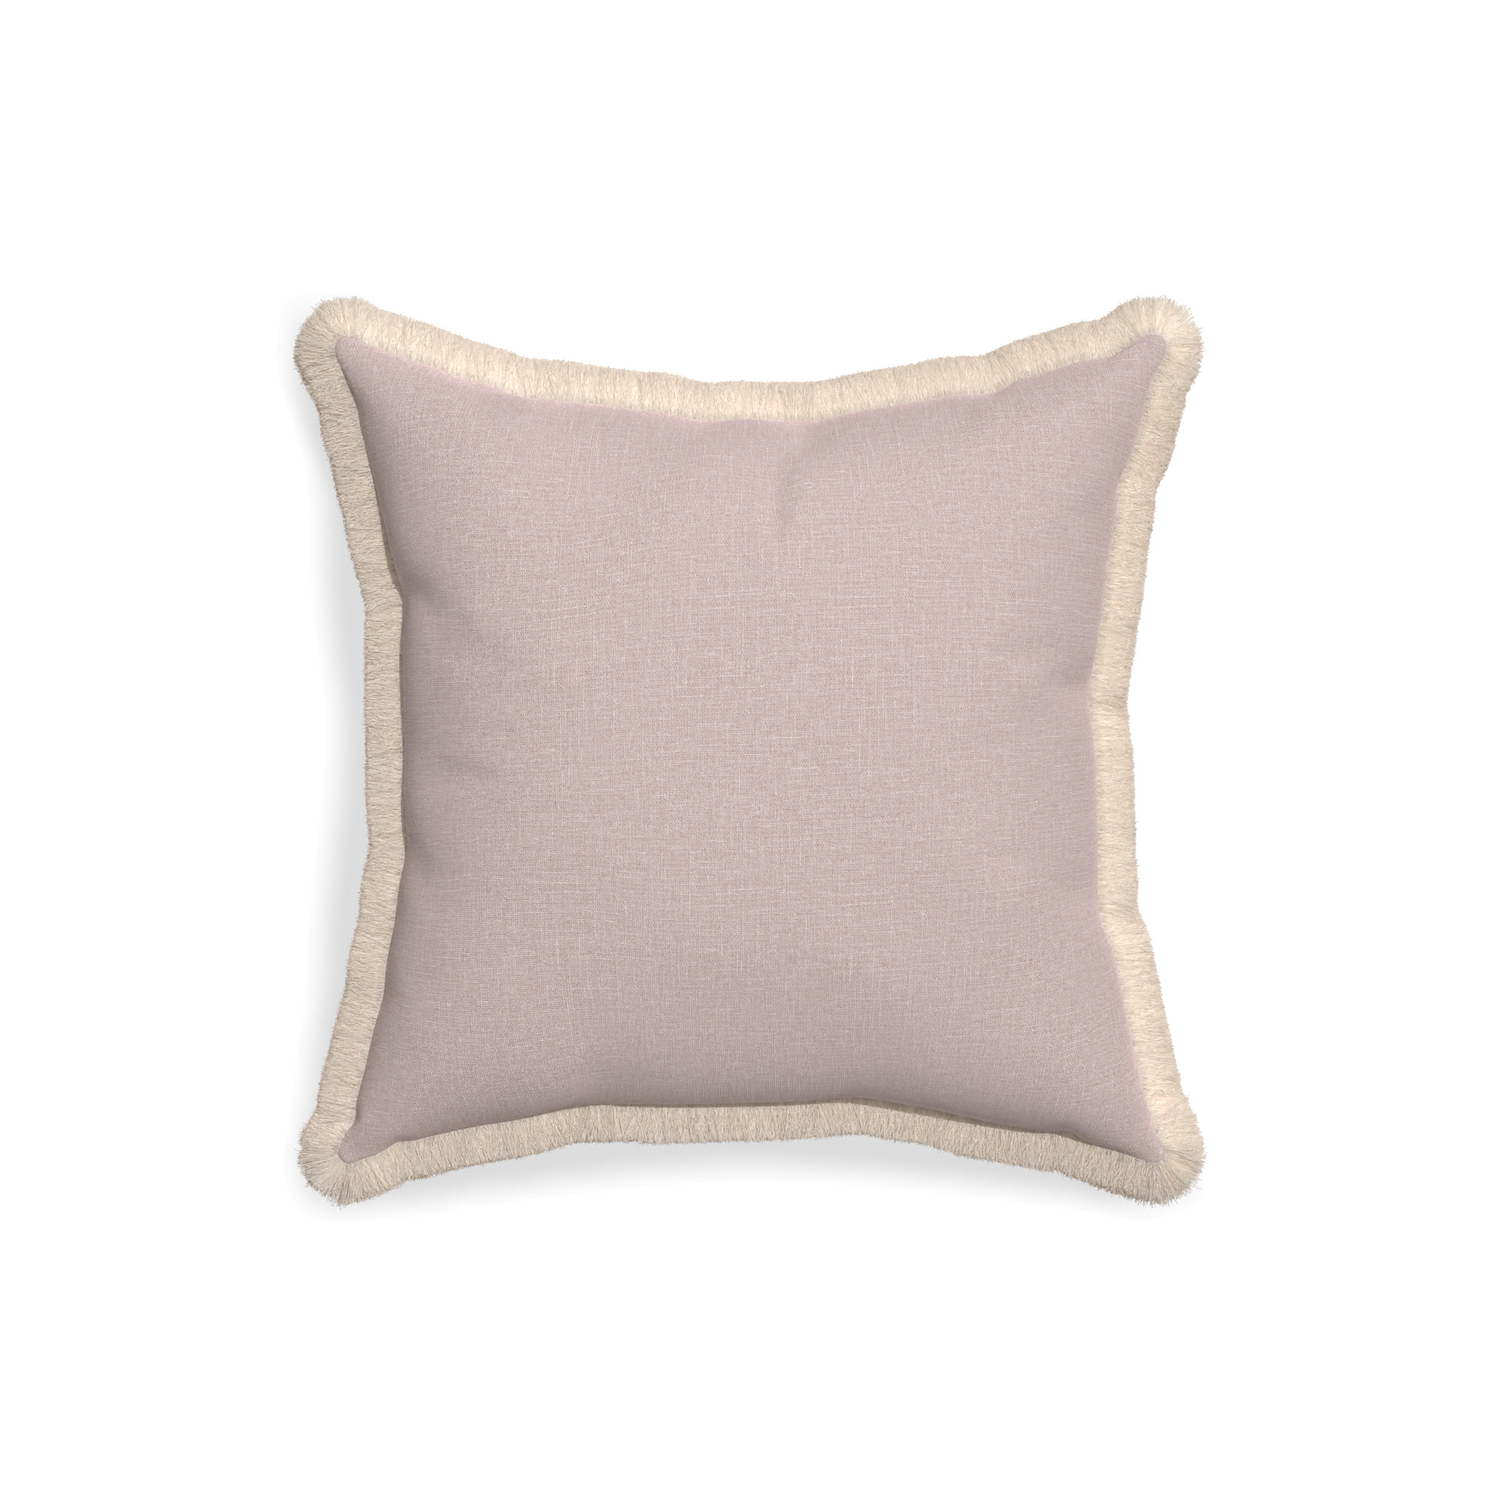 18-square orchid custom mauve pinkpillow with cream fringe on white background